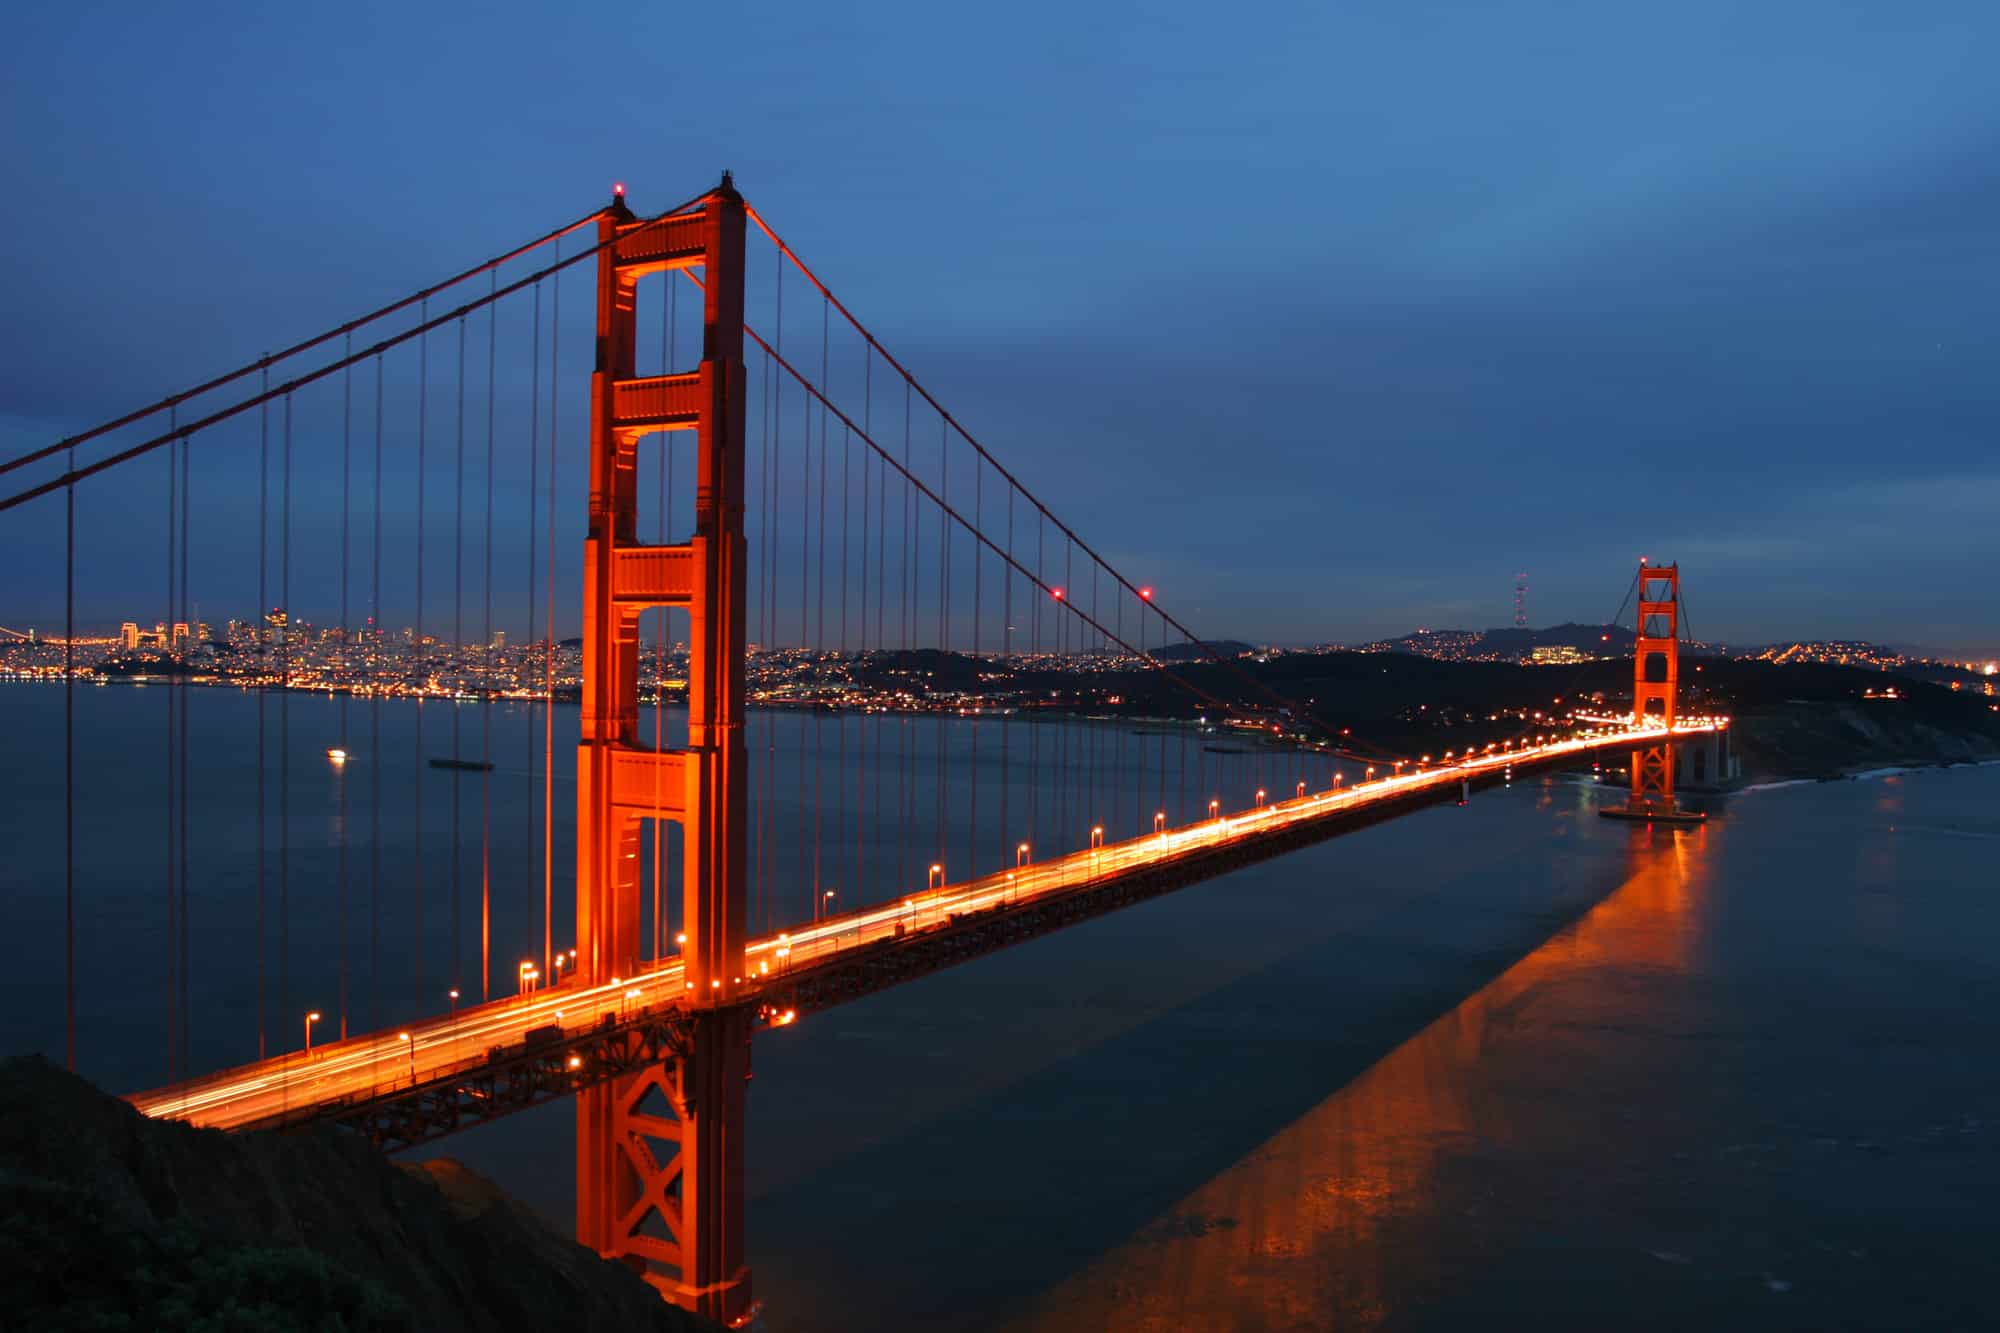 Top 3 Things to Do in San Francisco